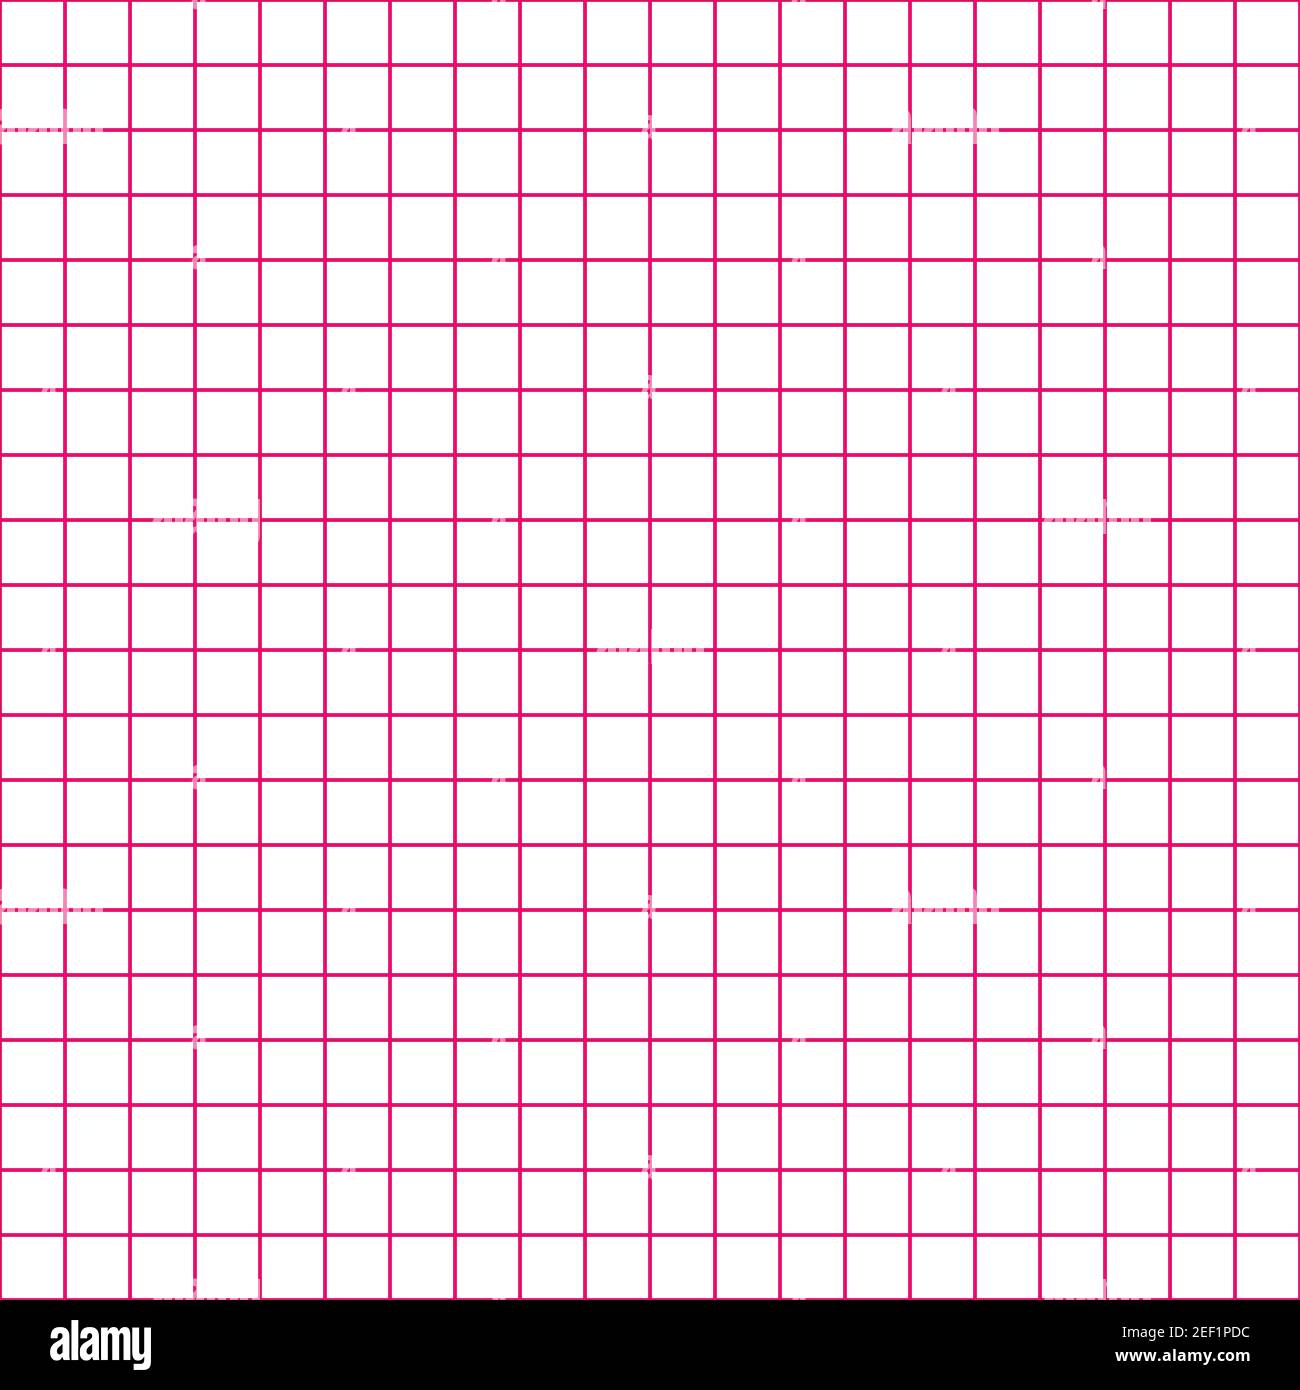 Pink Grid Vector Images over 13000